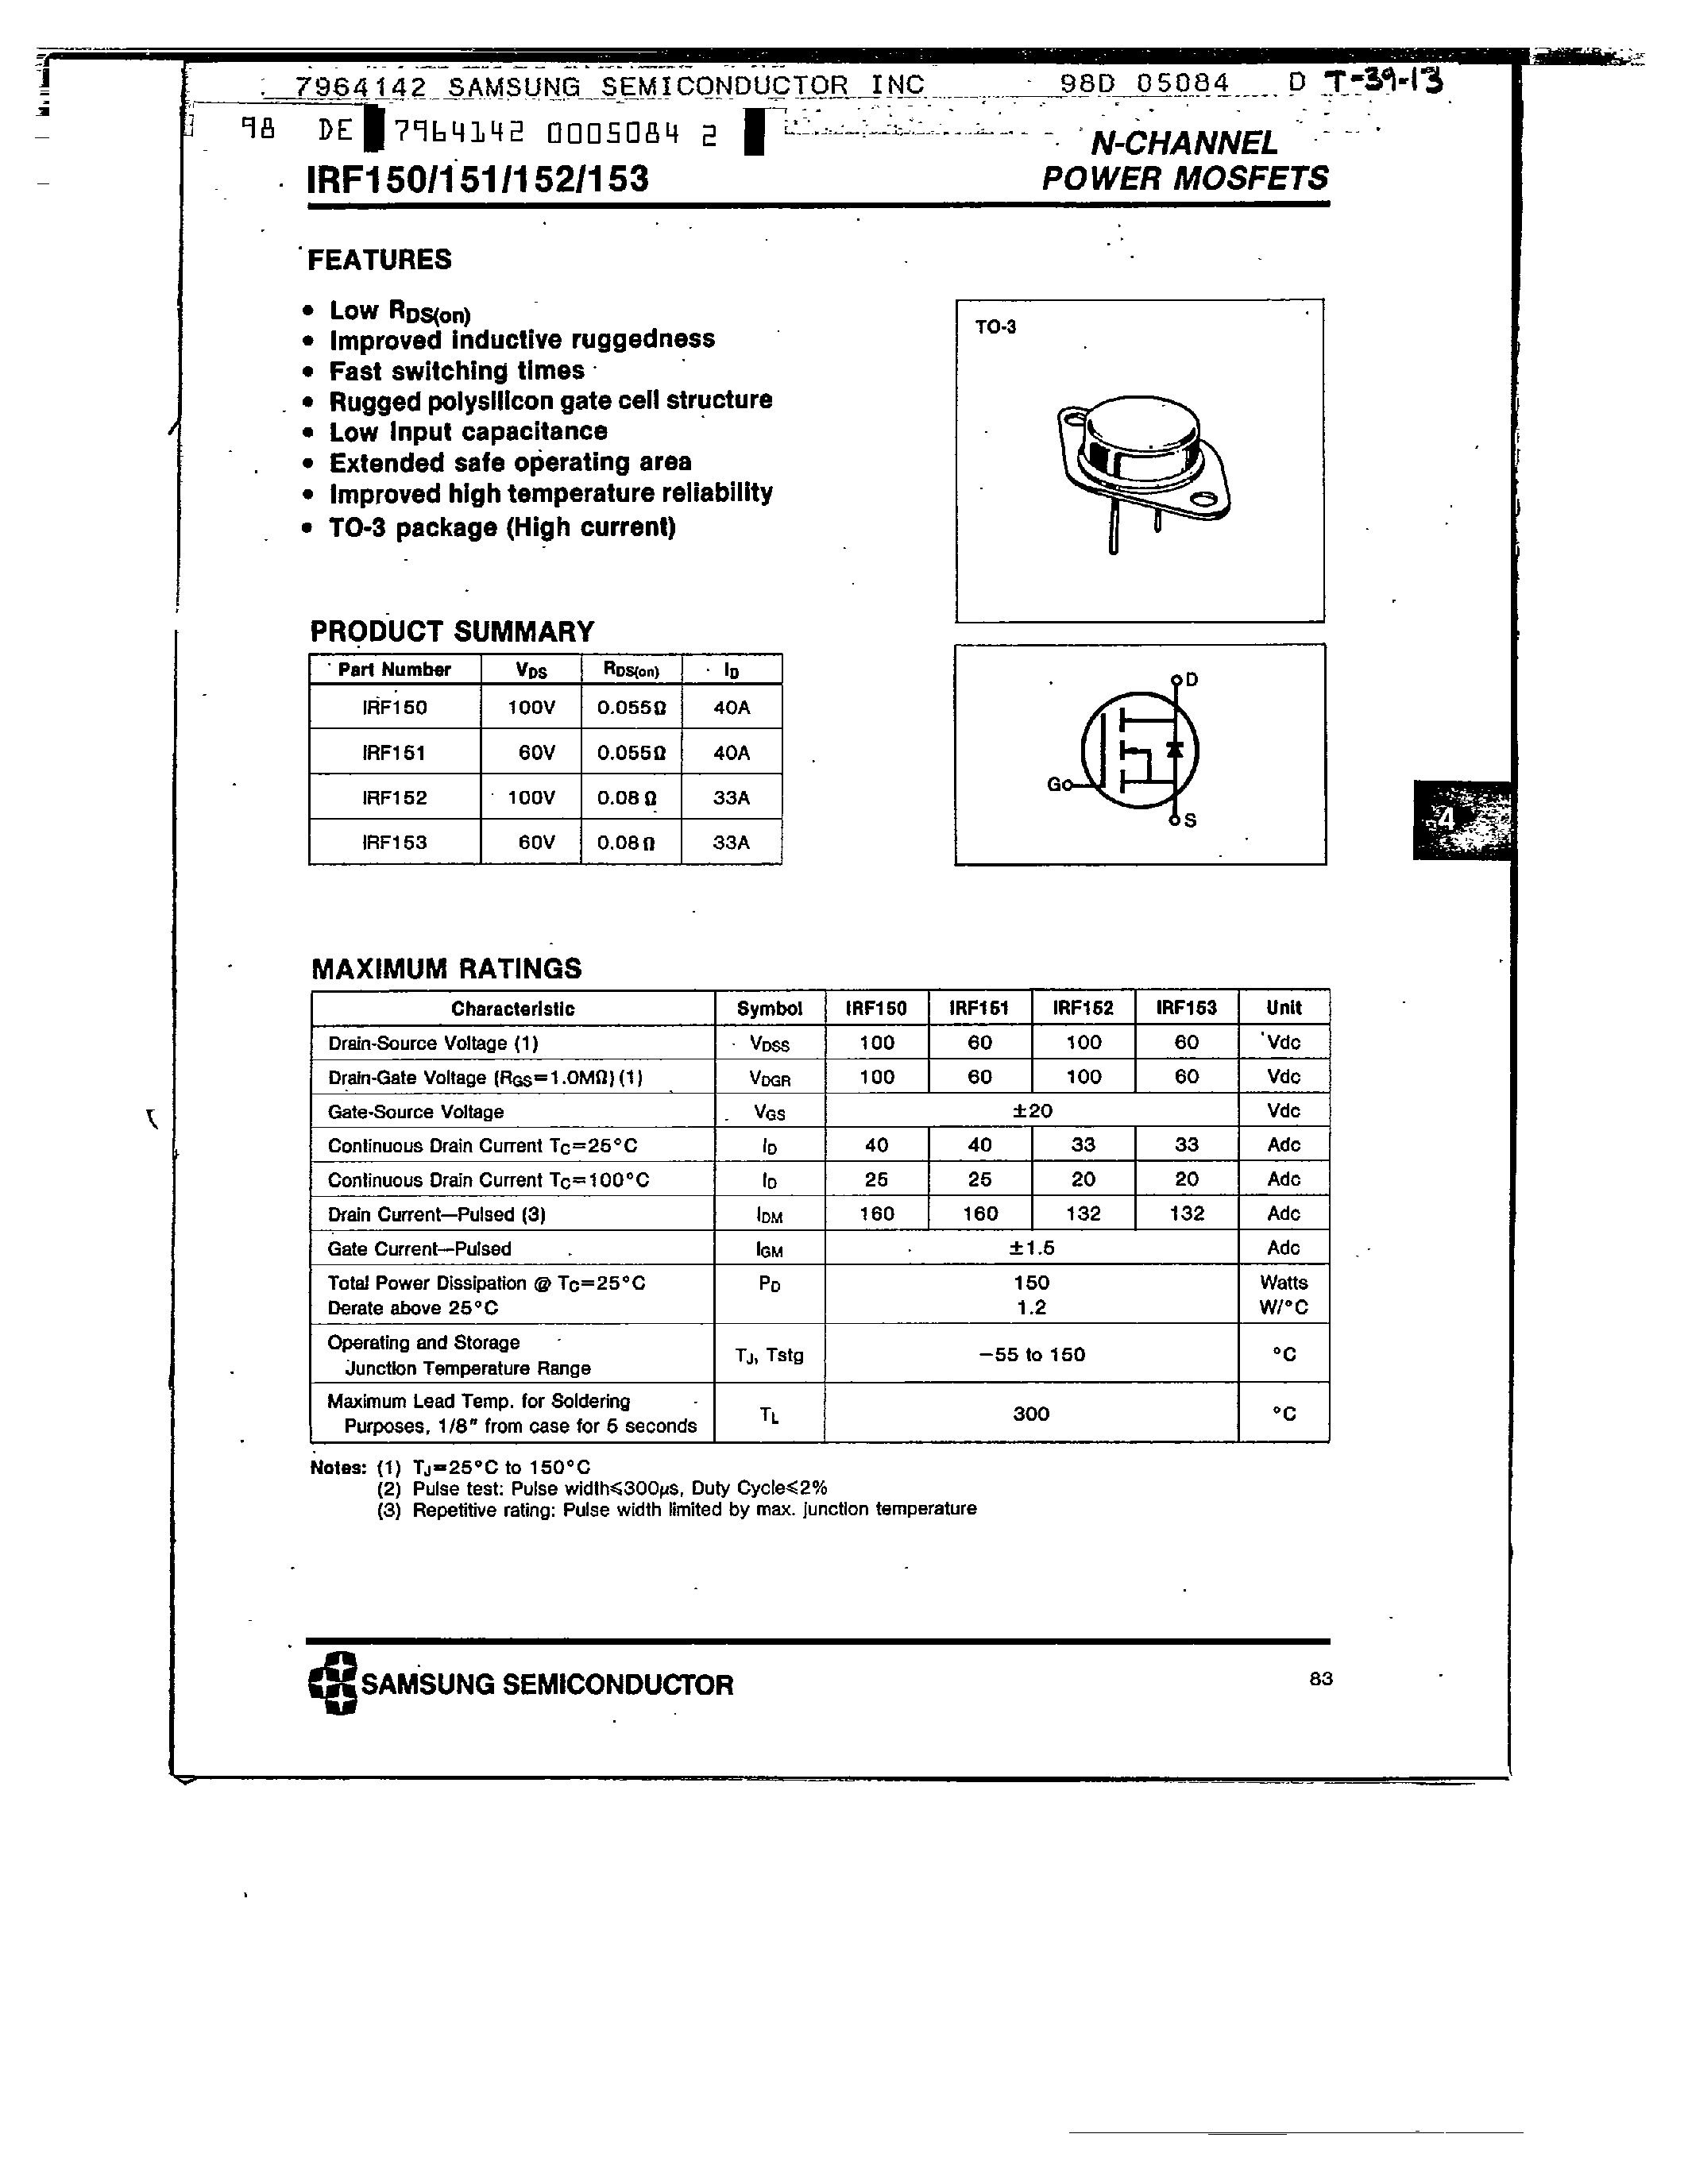 Datasheet IRF152 - N-CHANNEL POWER MOSFETS page 1